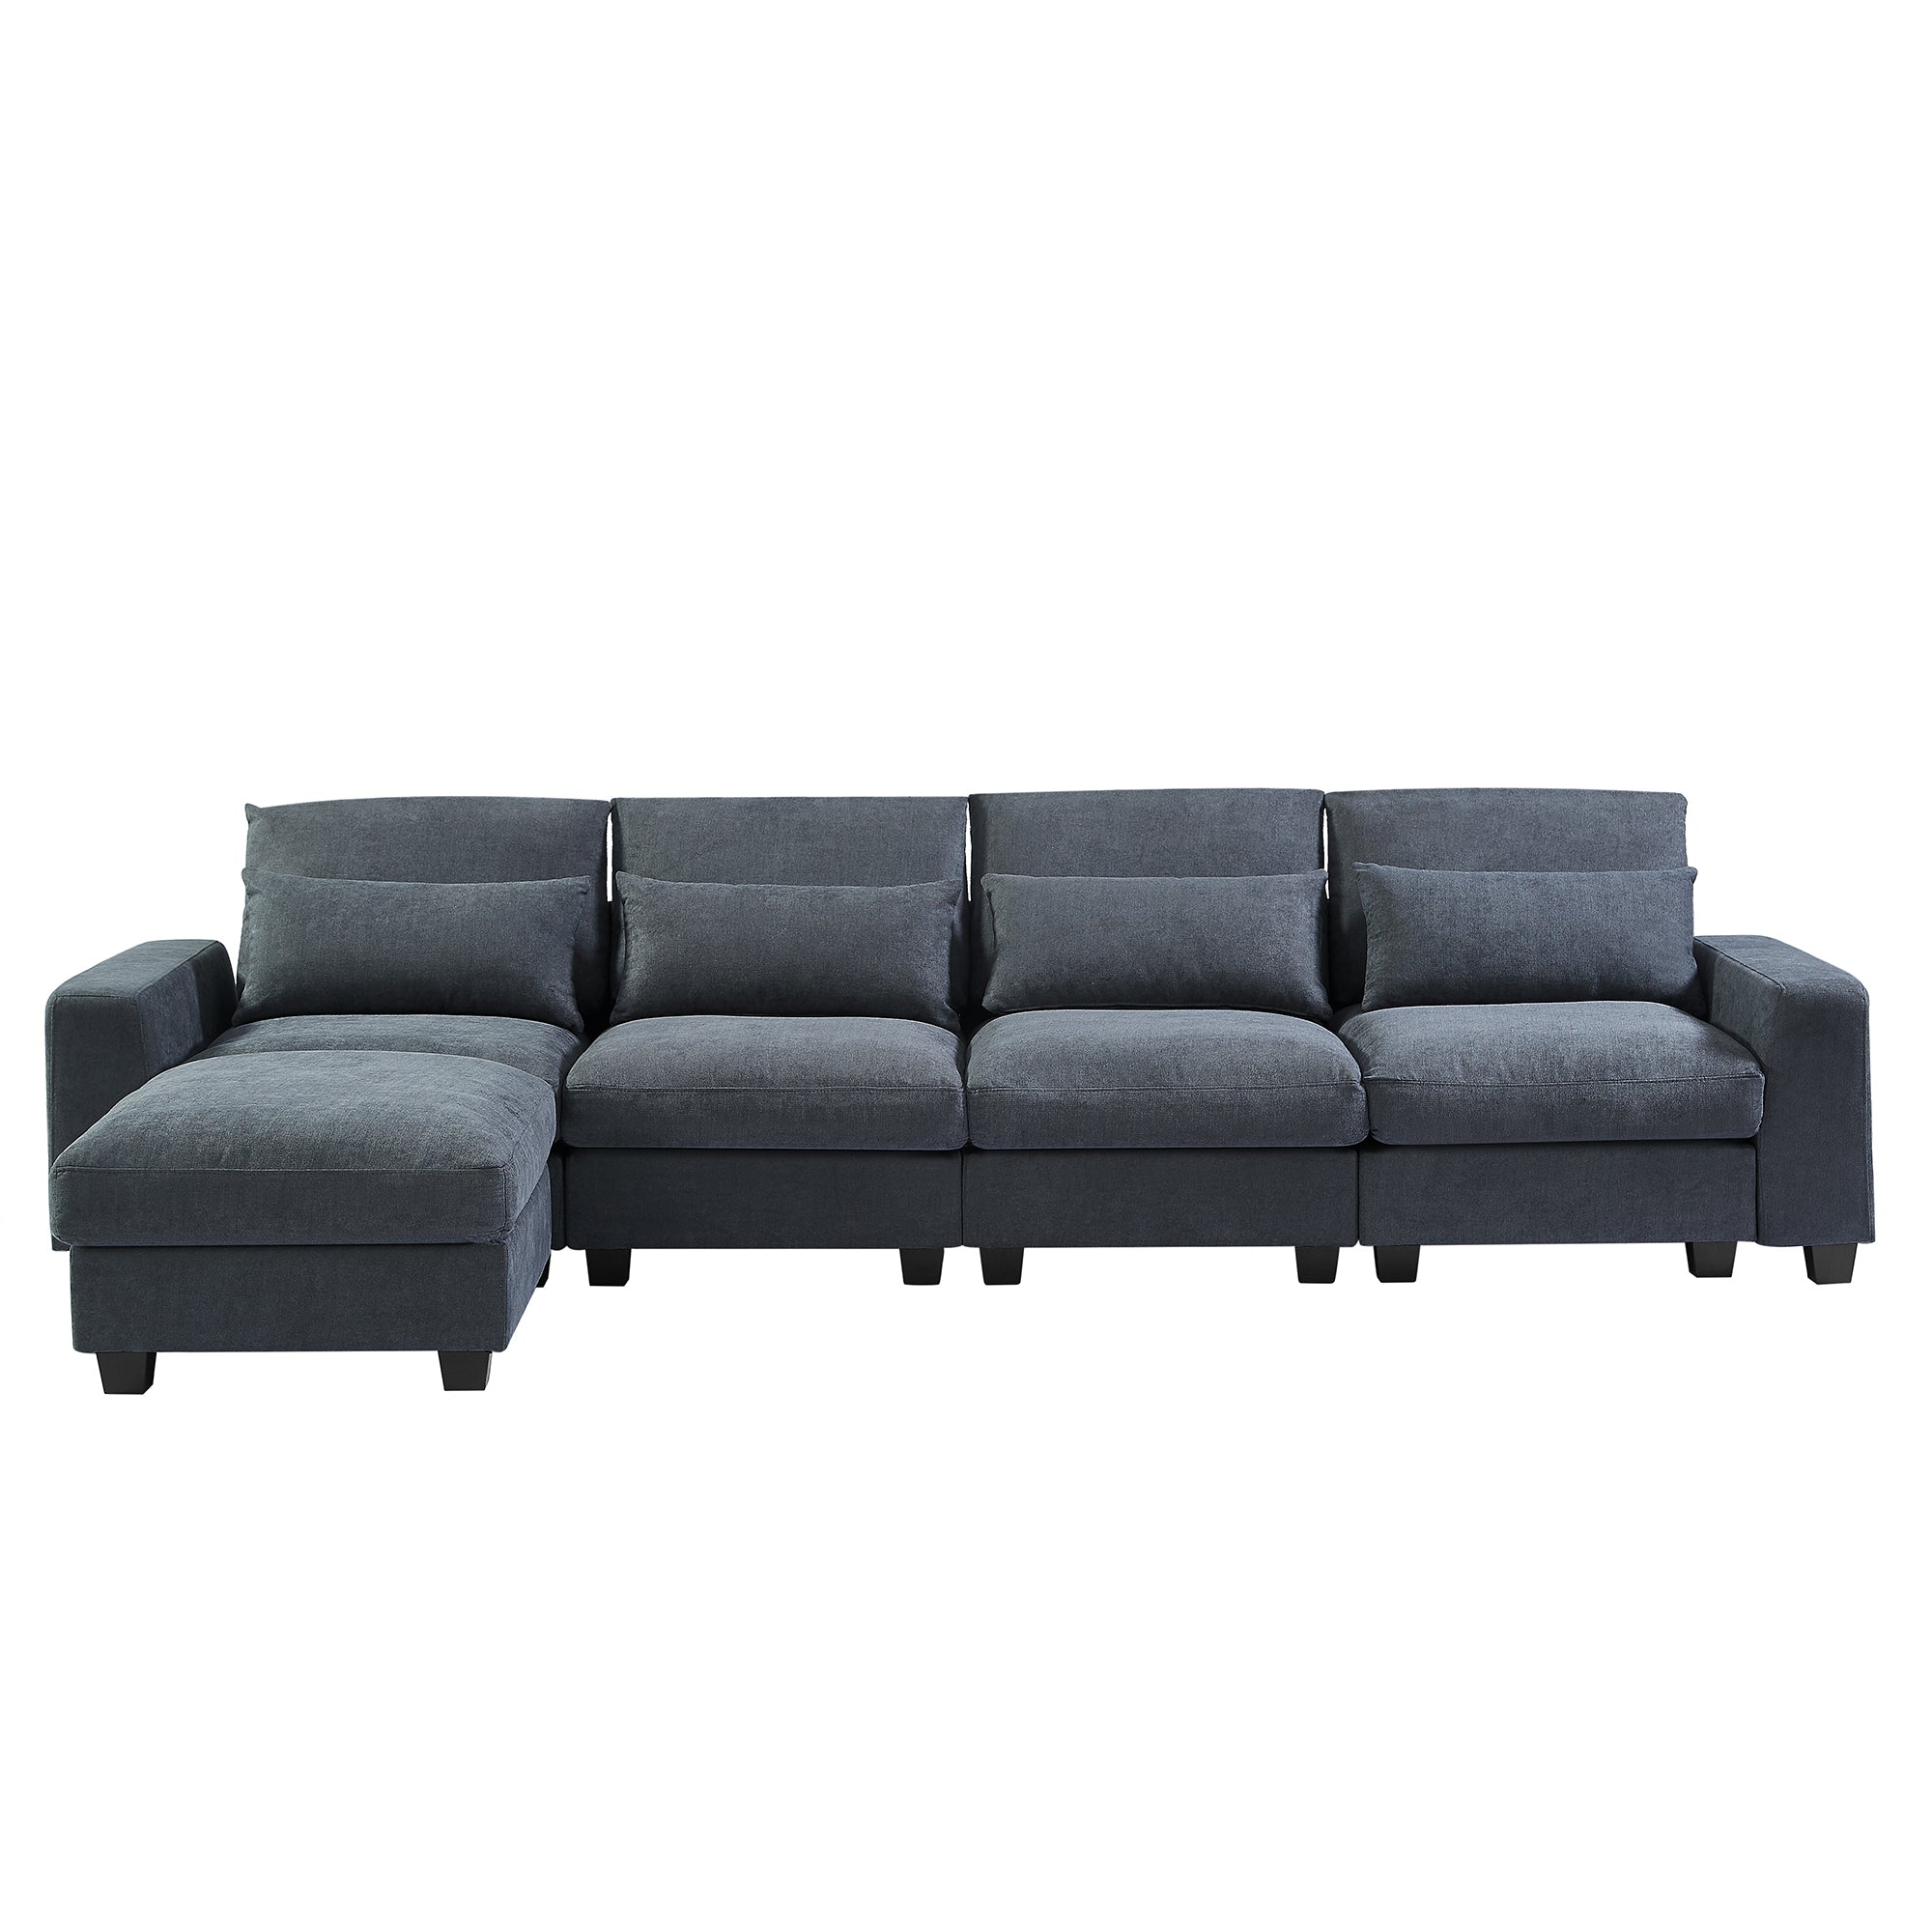 U-Style Modern Large L-Shape Feather Filled Sectional Sofa | Convertible Sofa Couch with Reversible Chaise for Living Room | Comfort and Style Combined-Stationary Sectionals-American Furniture Outlet